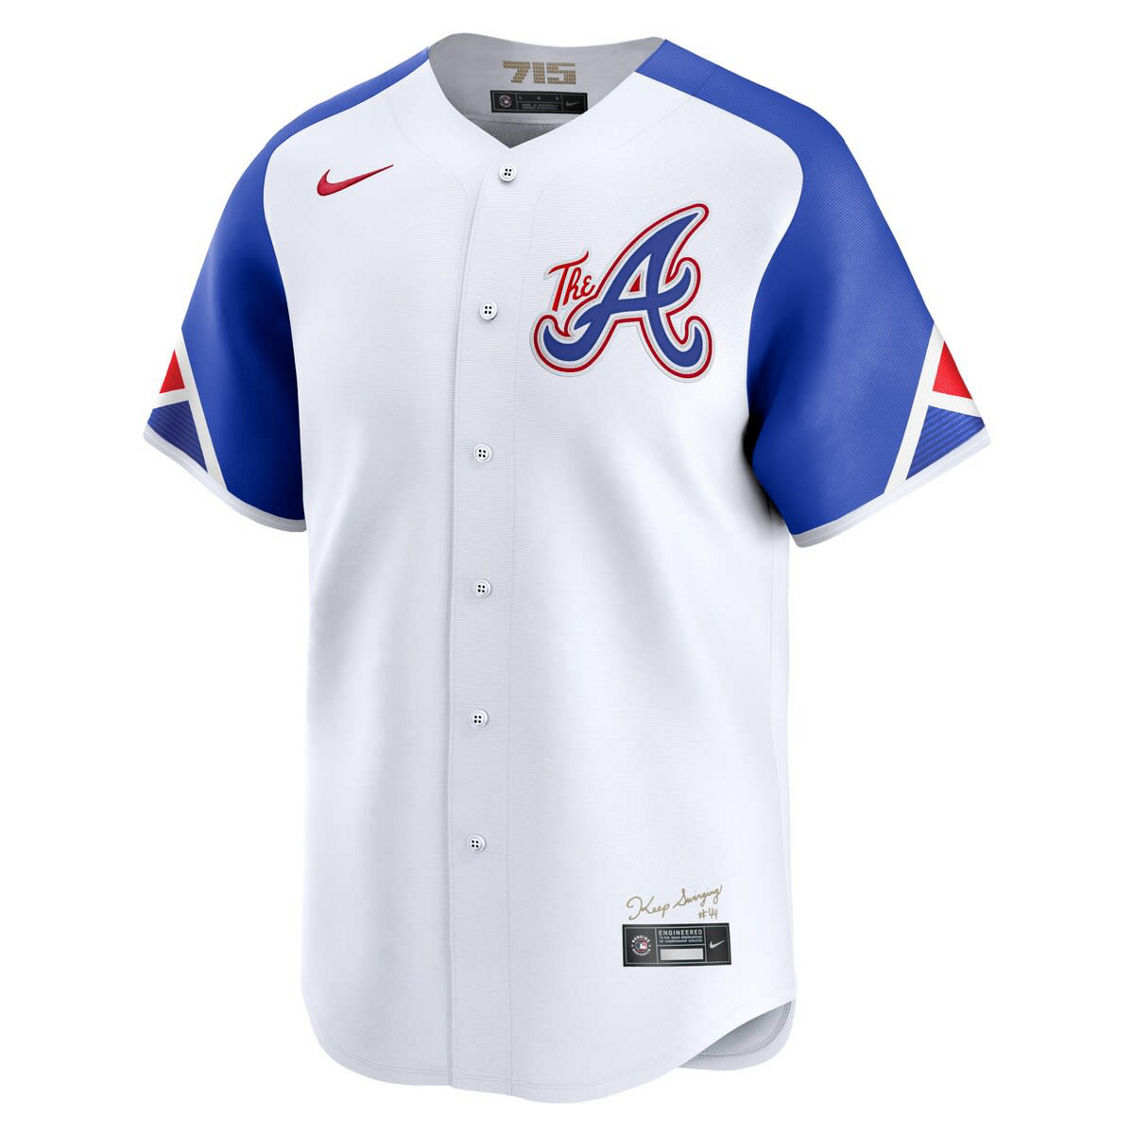 Nike Men's White Atlanta Braves City Connect Limited Jersey - Image 3 of 4